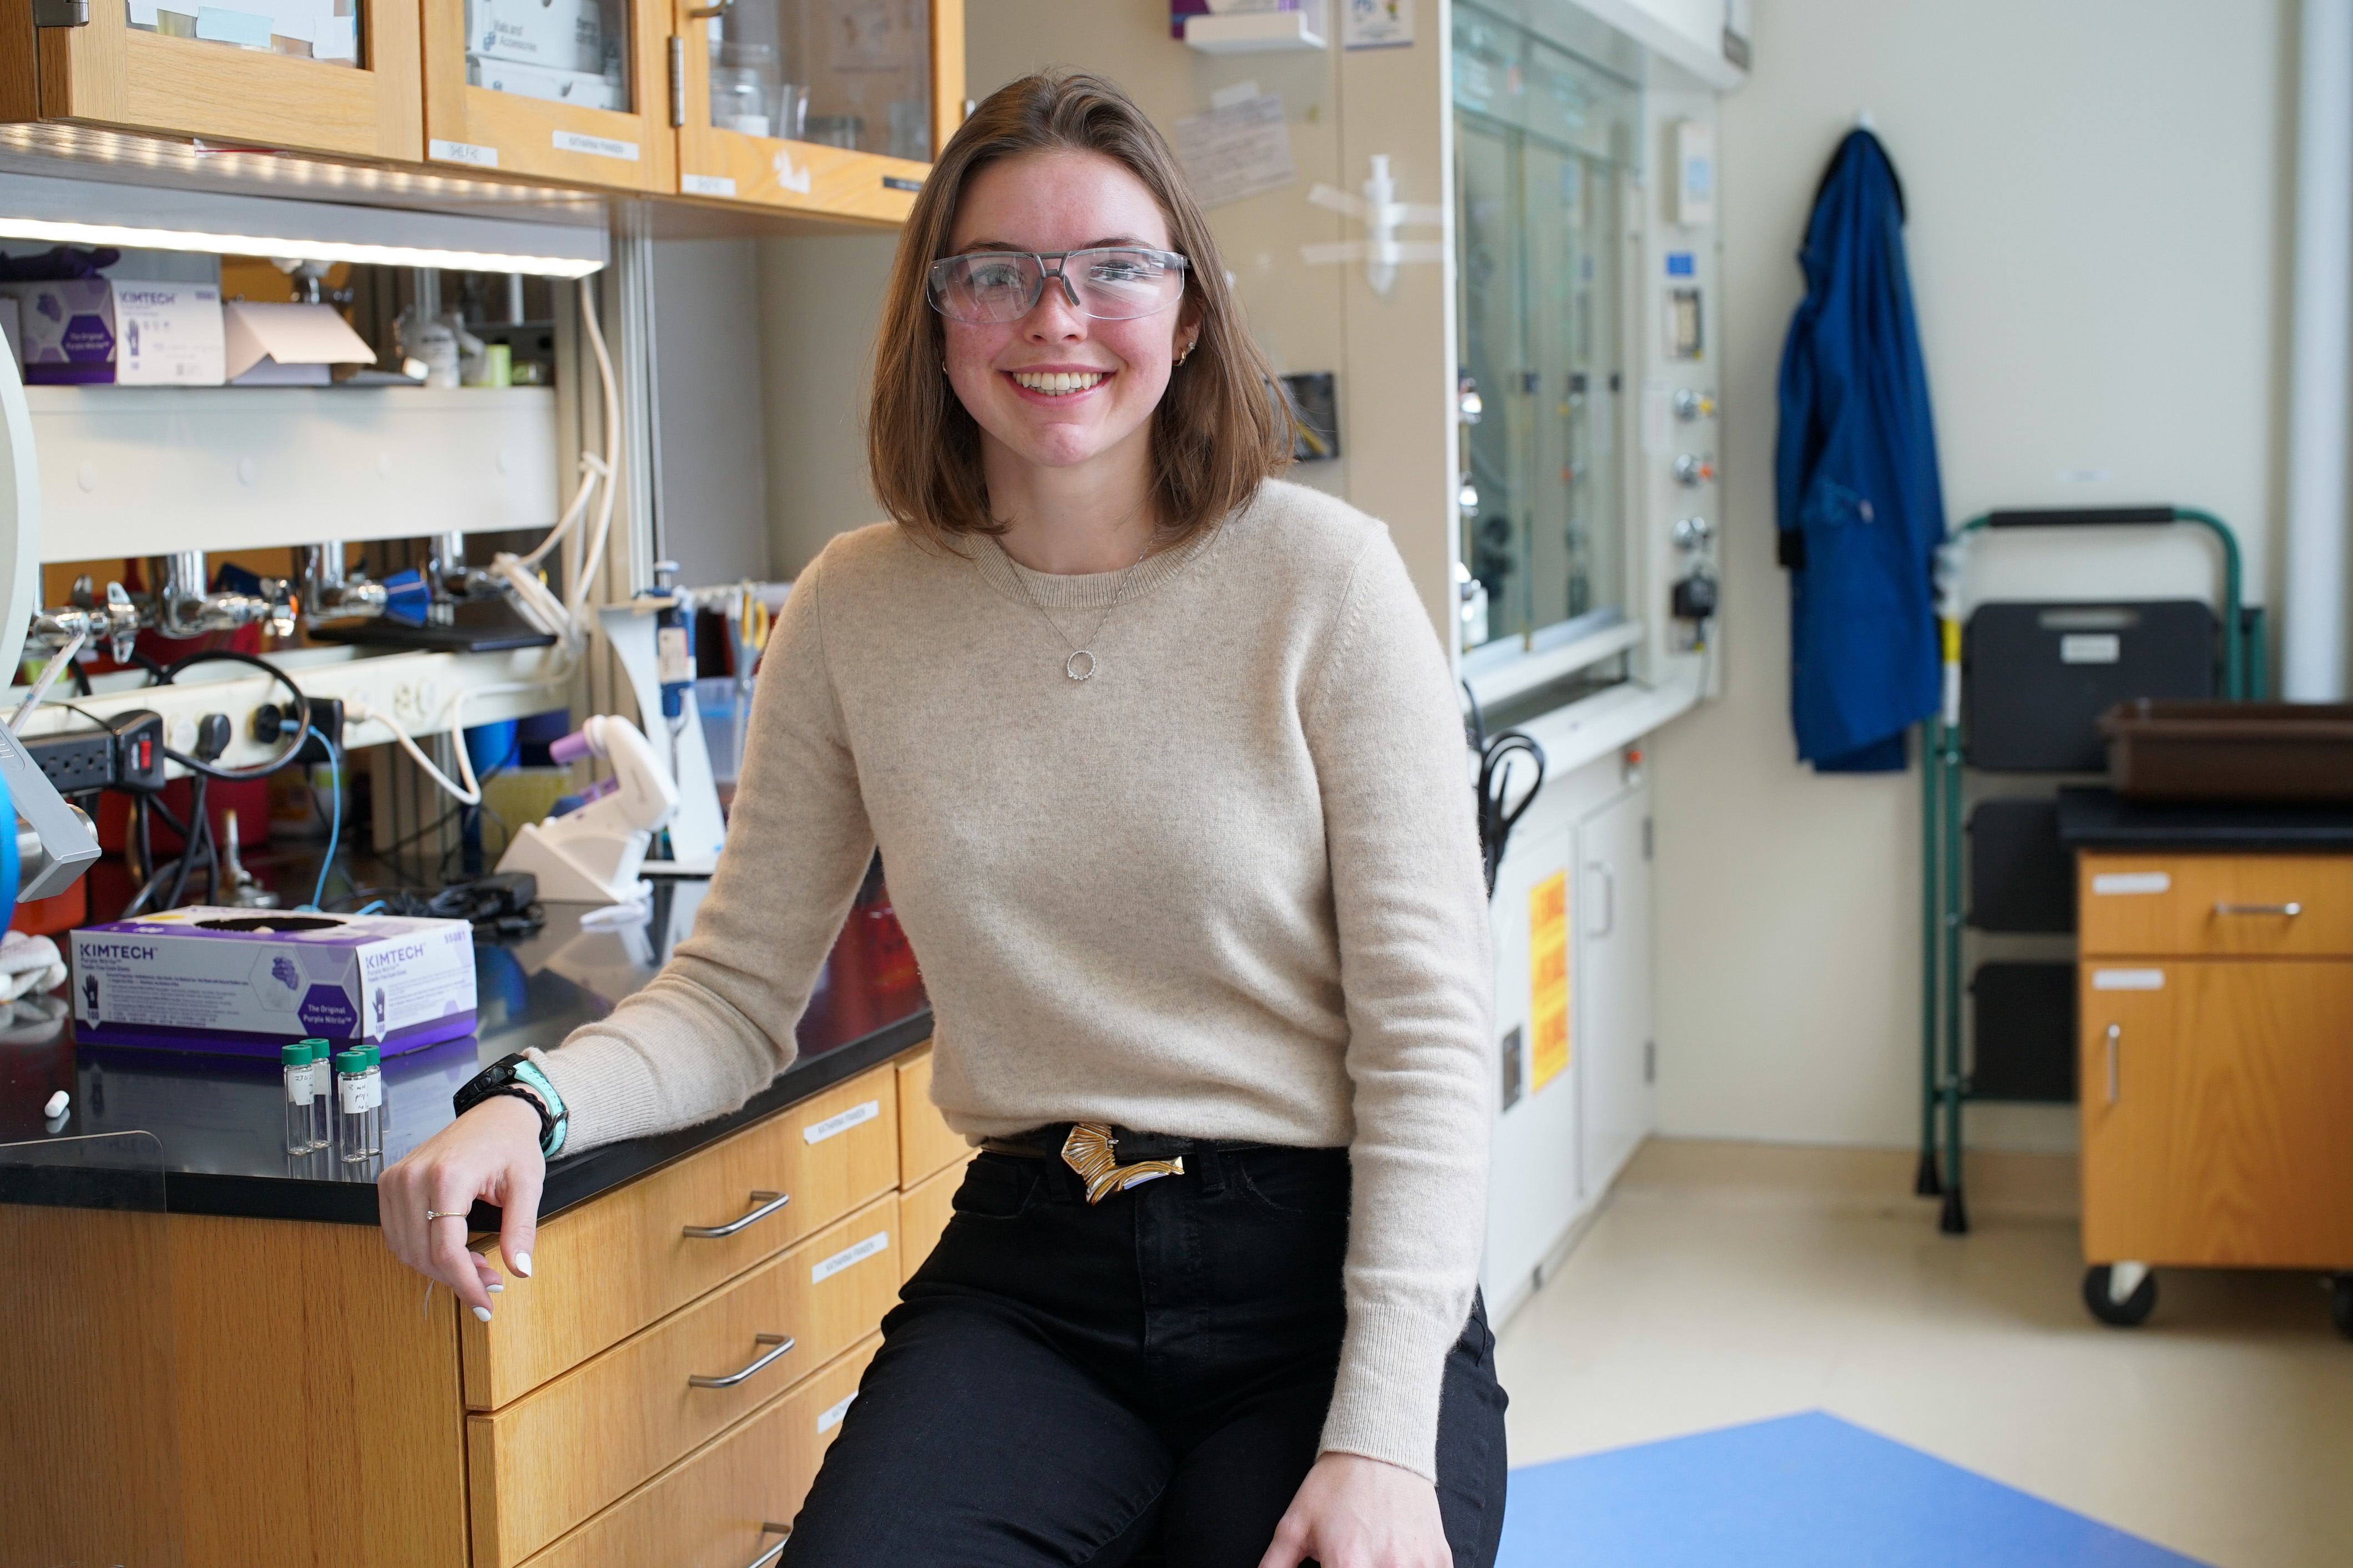 Alexis Hocken is an MIT PhD candidate in chemical engineering, working in the lab of Brad Olsen.